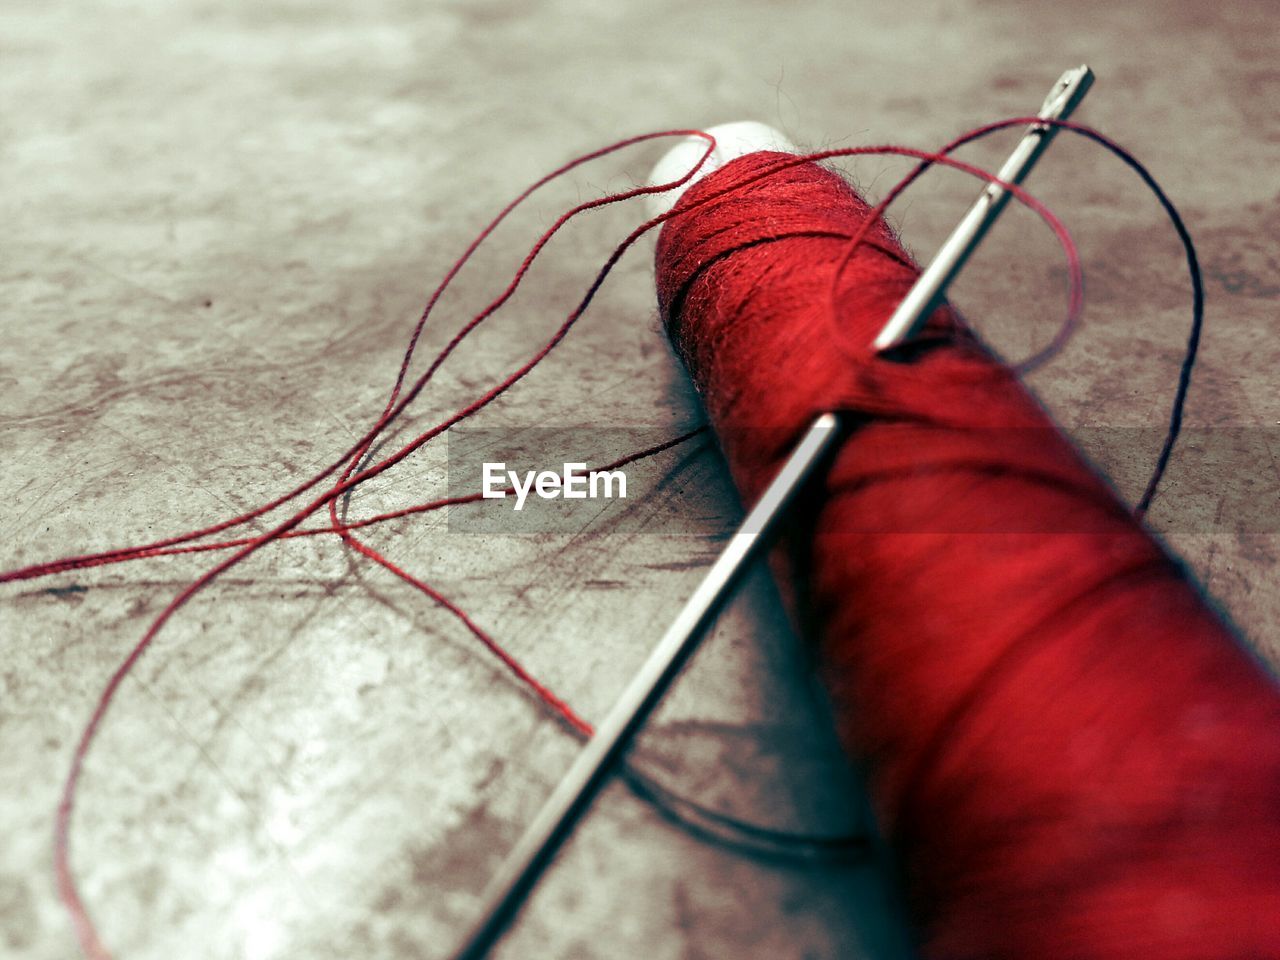 Close-up of red thread with needle fallen on floor